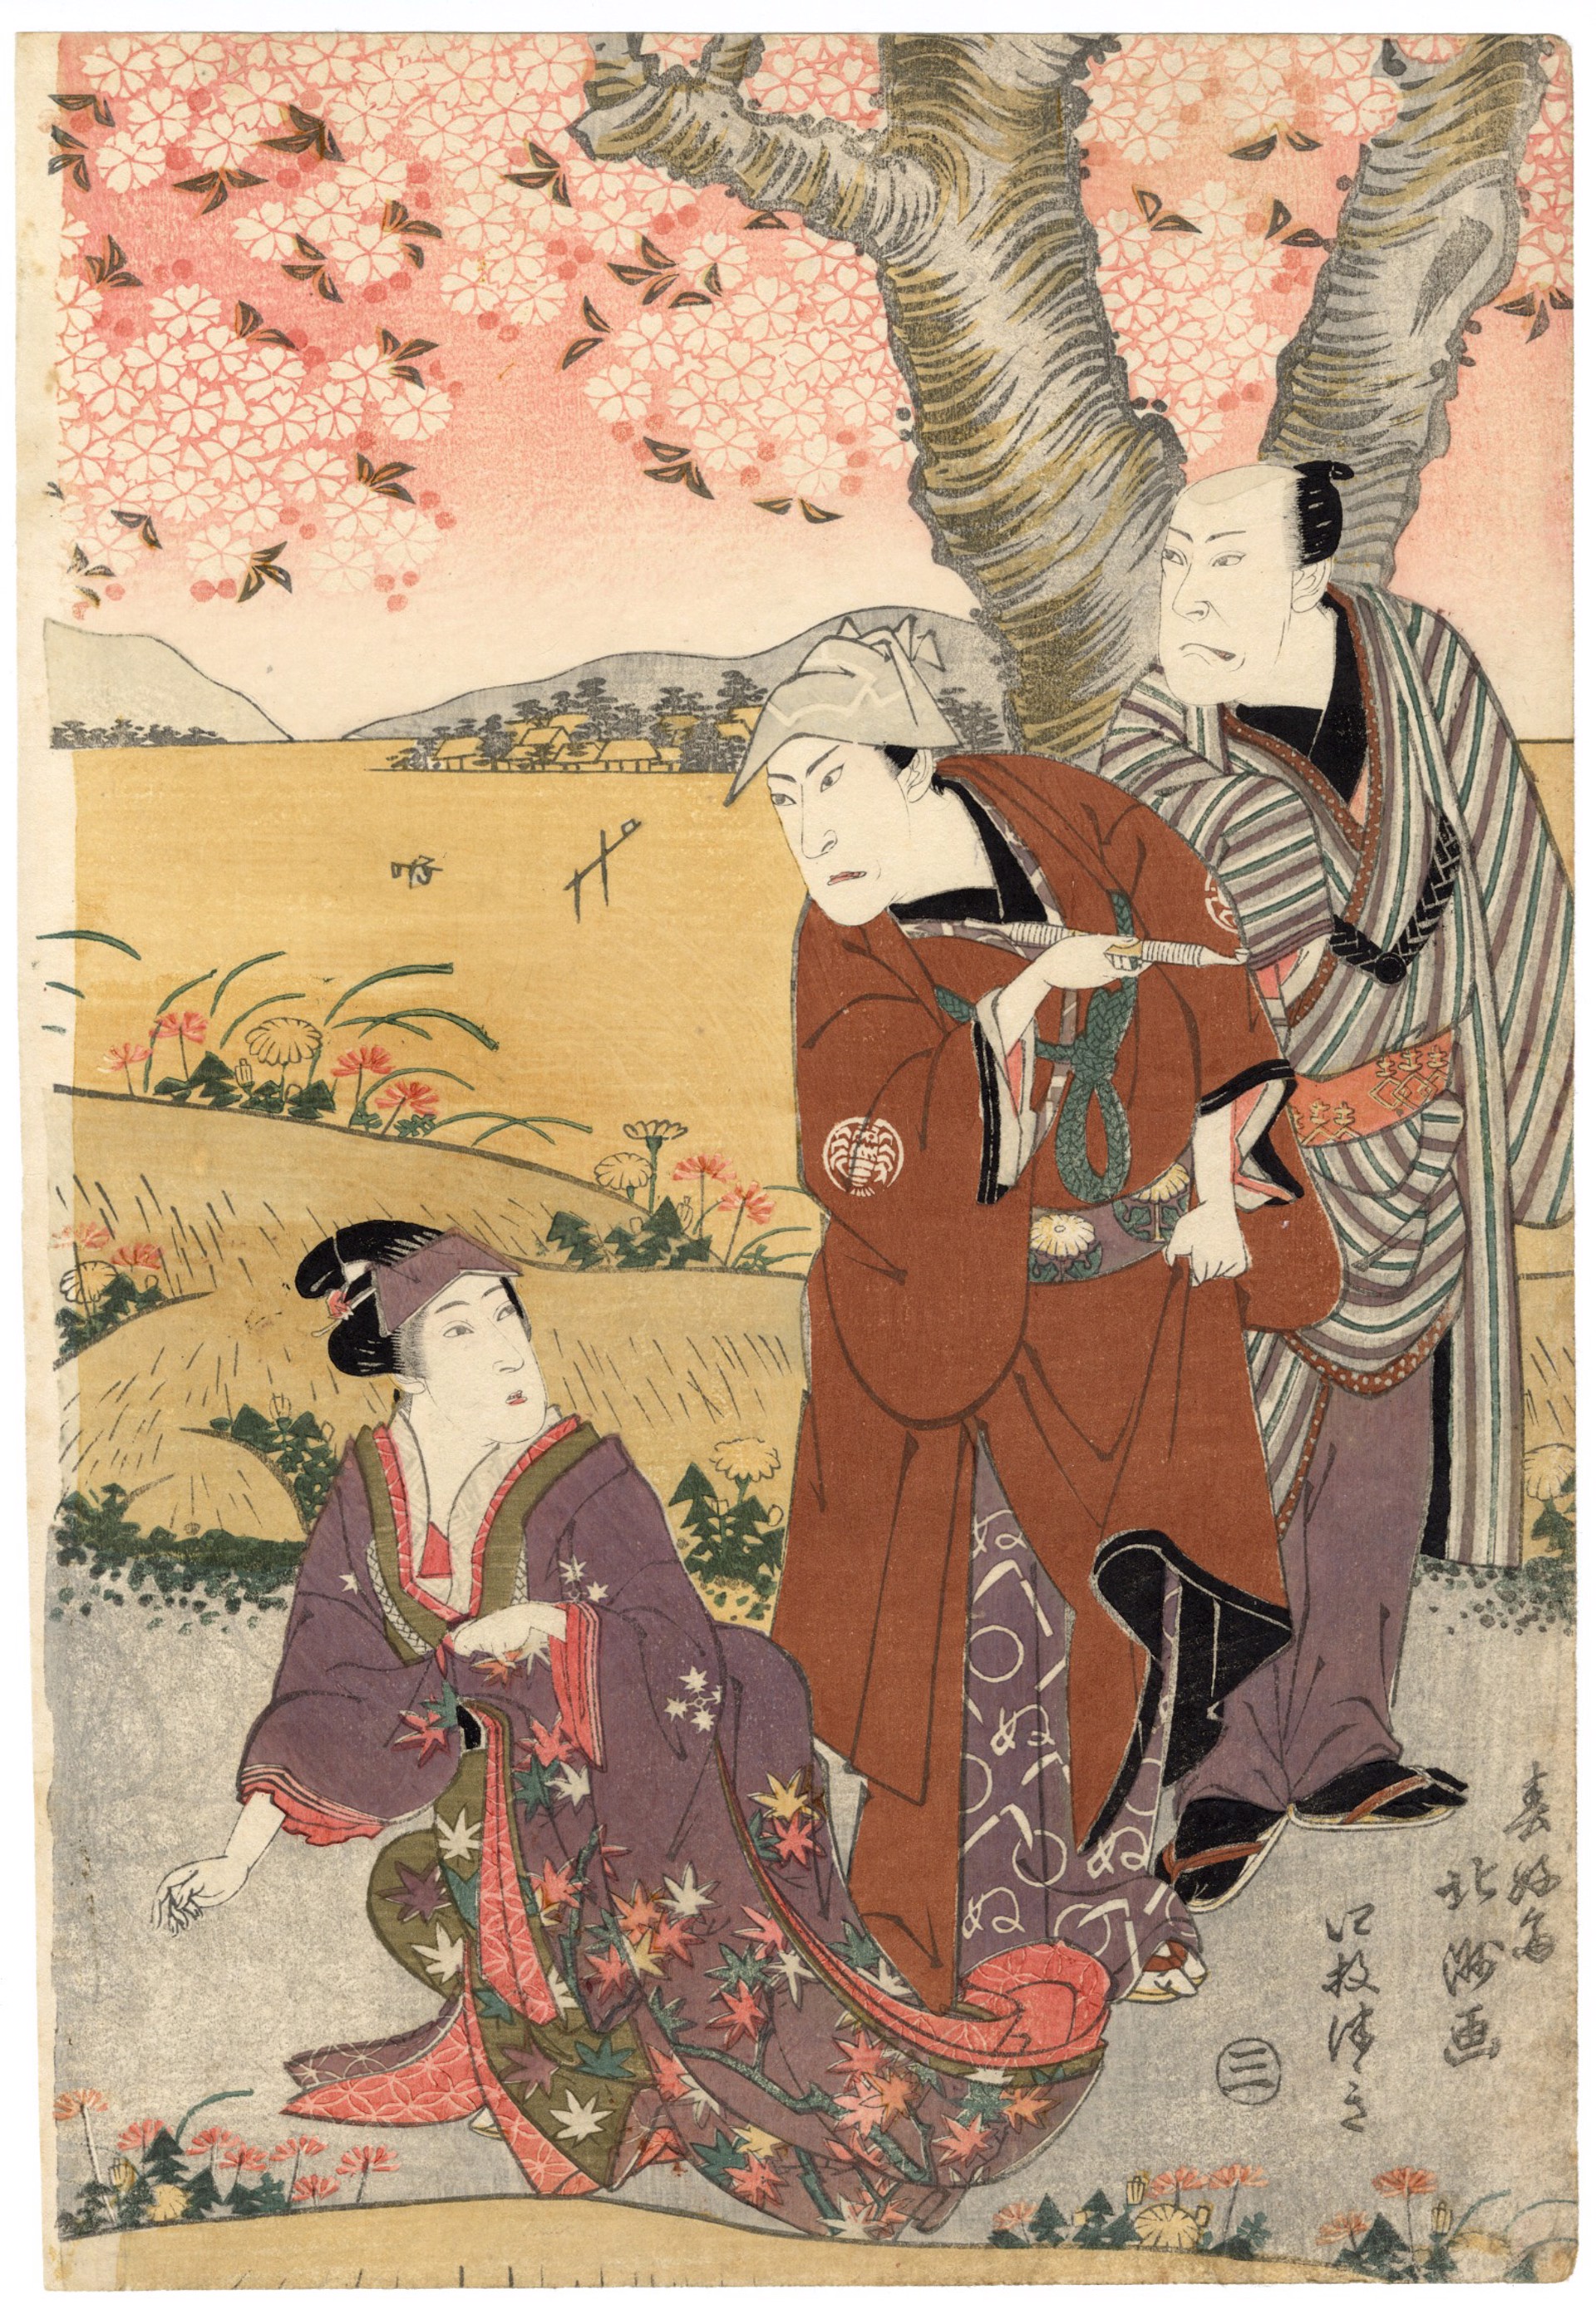 Actors Enjoying a Picnic and Viewing Cherry Blossoms by Hokushu